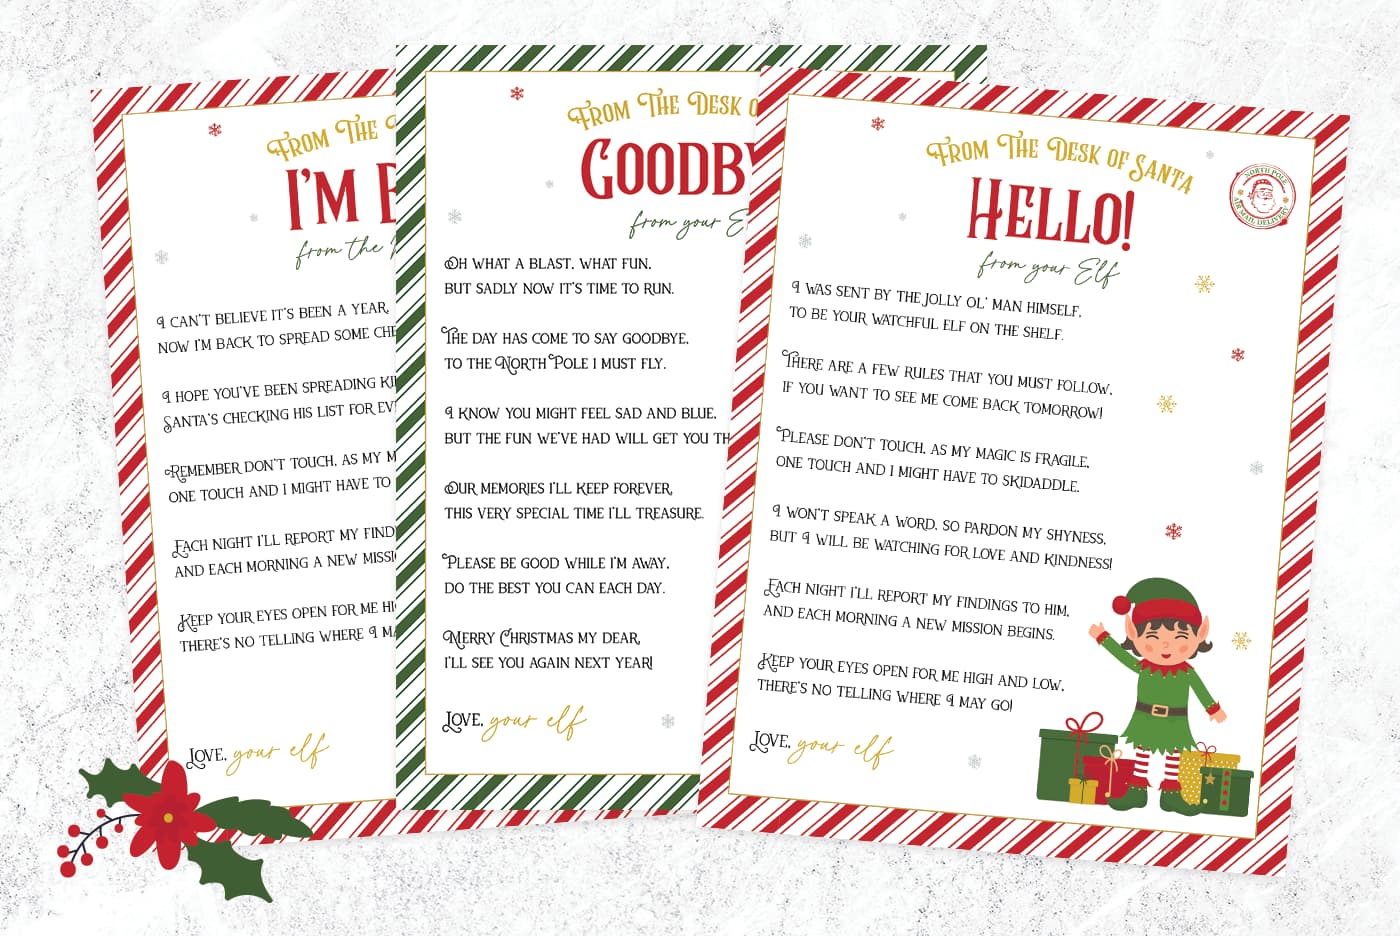 Free printable Elf On The Shelf letters.